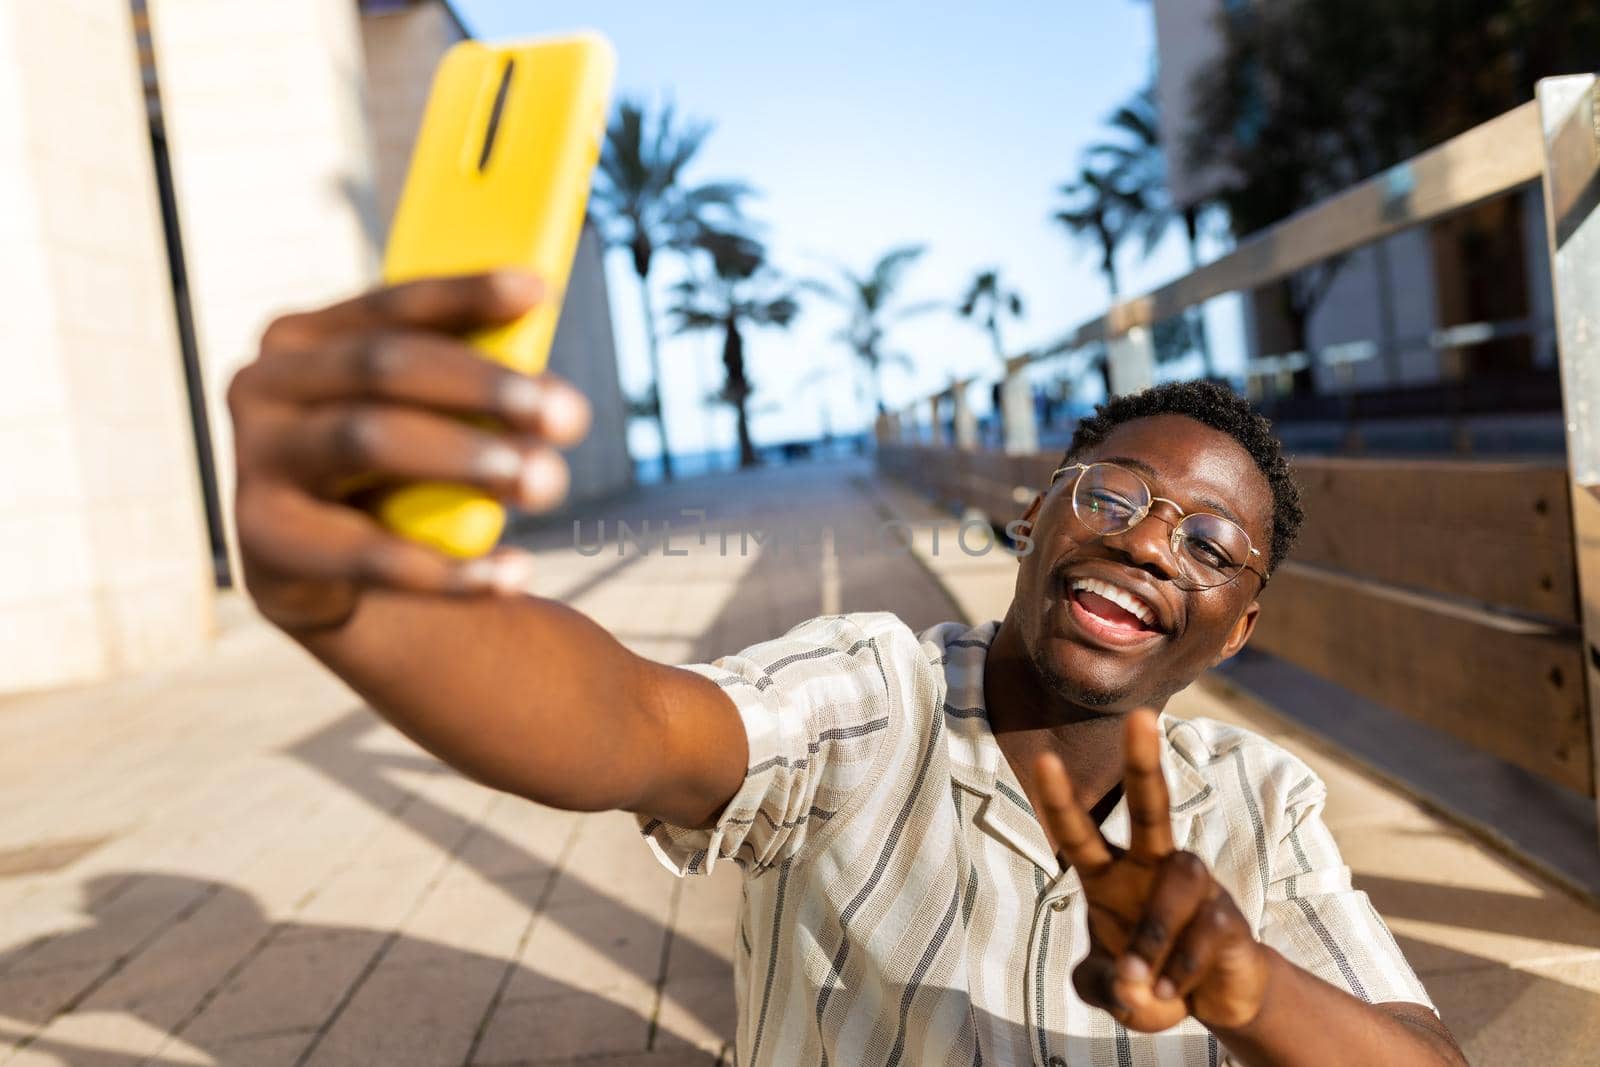 Young black man taking selfie using phone making peace sign. Happy, African american male having fun. Social media concept.